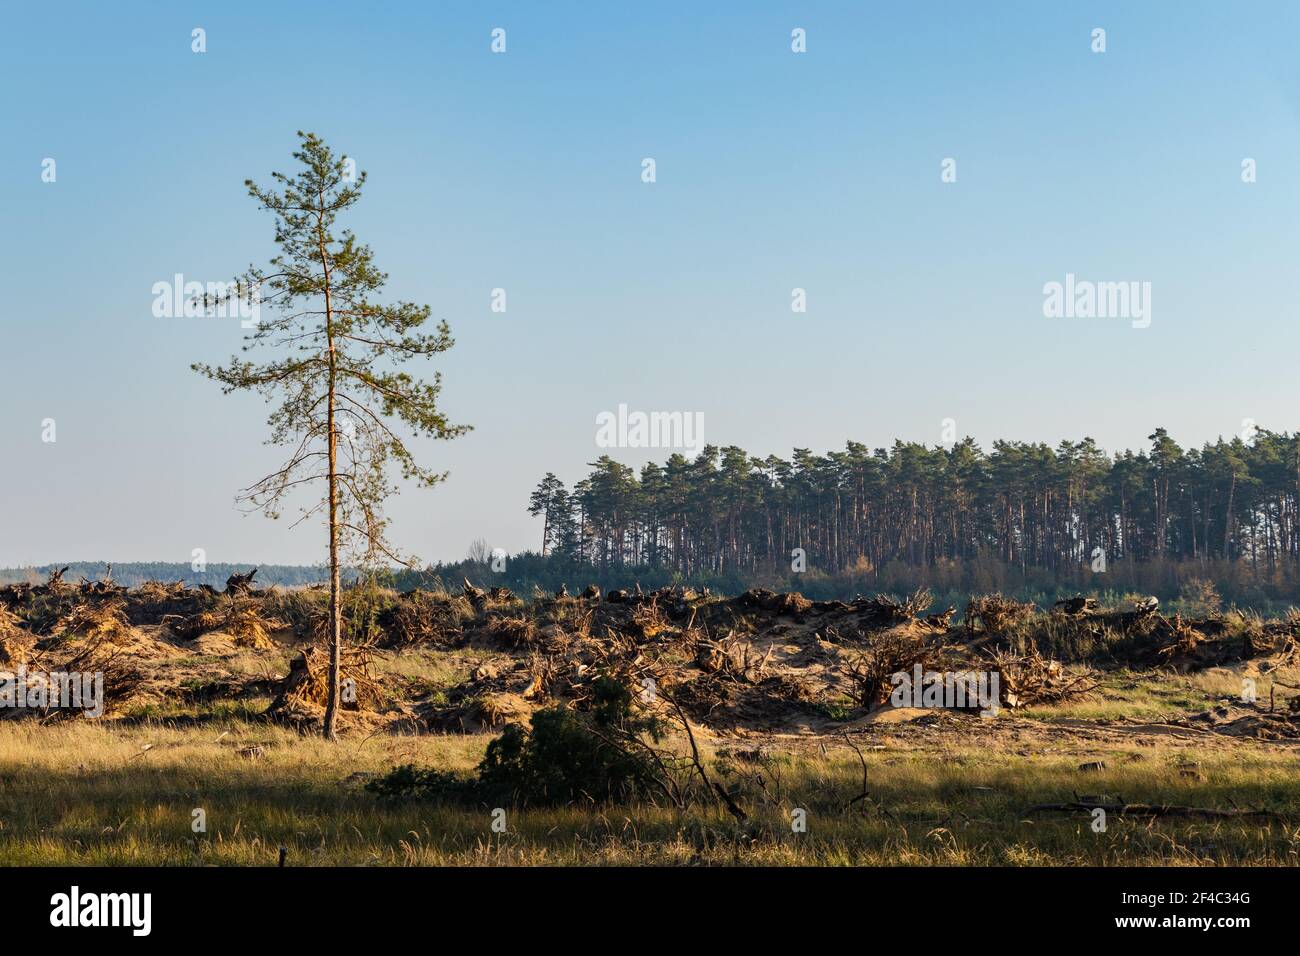 Deforestation in nature. Lumber industry and impact on the environment, last pine tree from forest Stock Photo